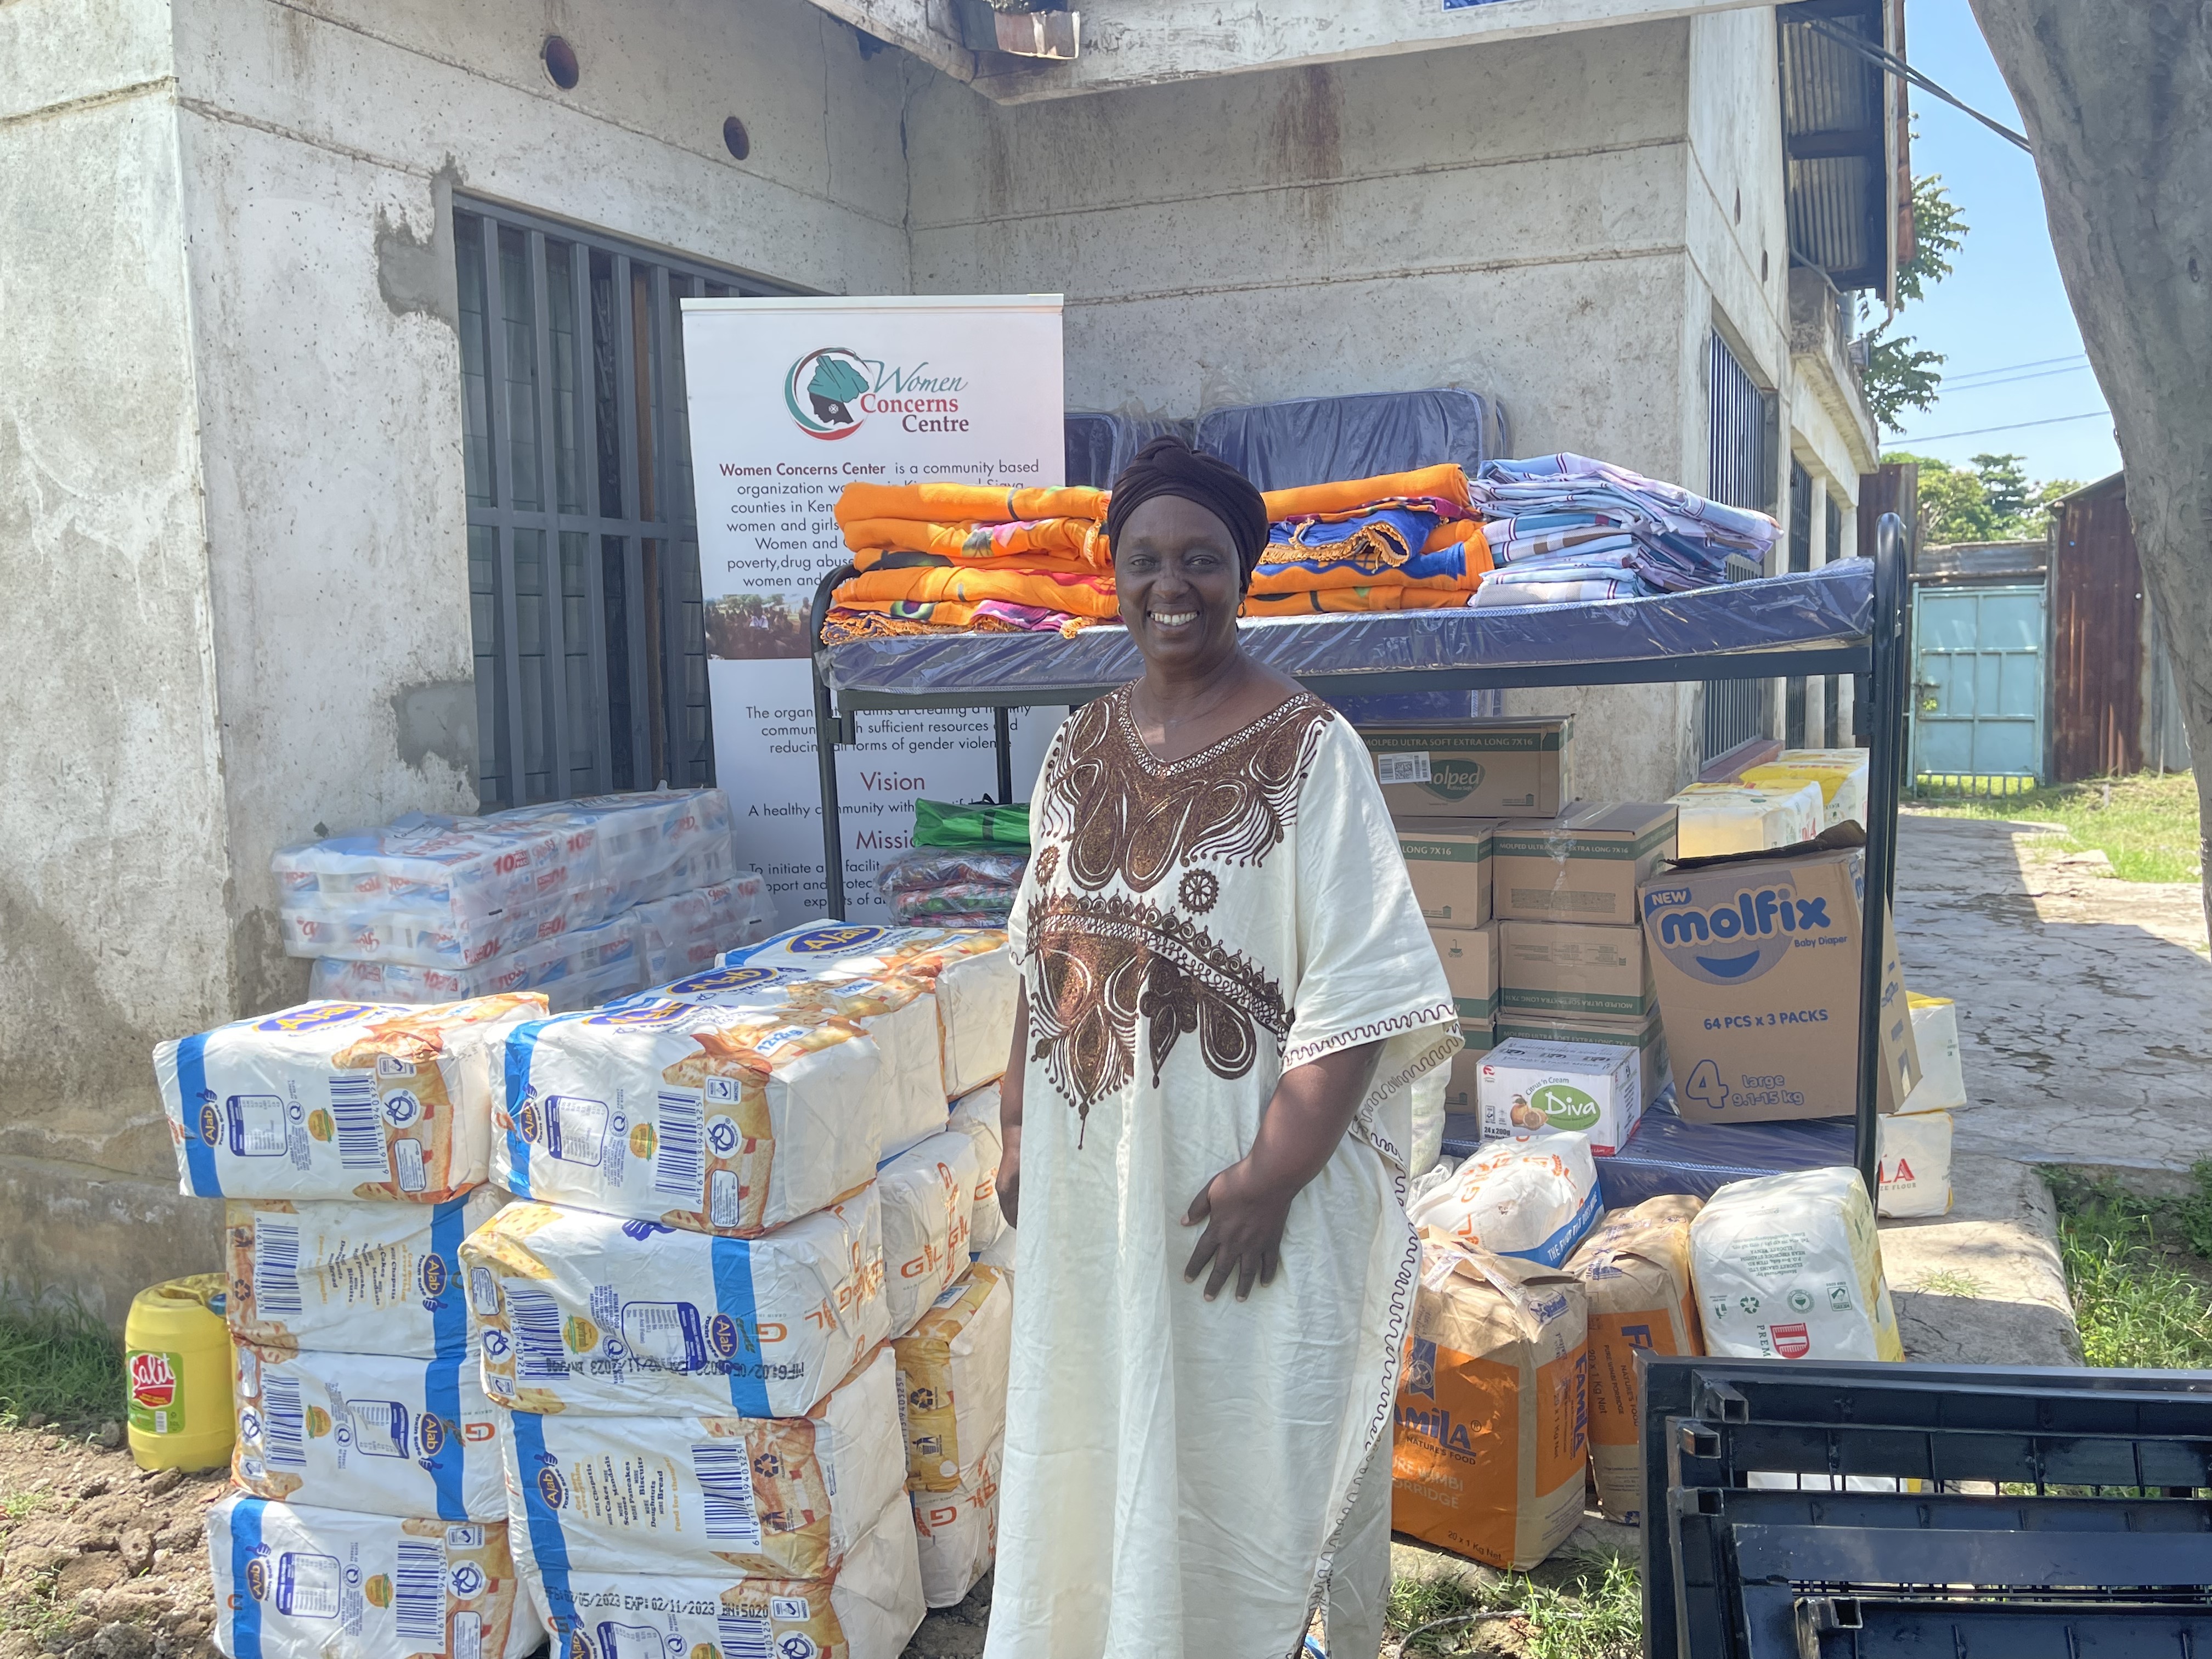 Margaret Mbira, received essential commodities from UN Women to support the Women Concern Centre Shelter in Kisumu. Photo: UN Women/Tabitha Icuga